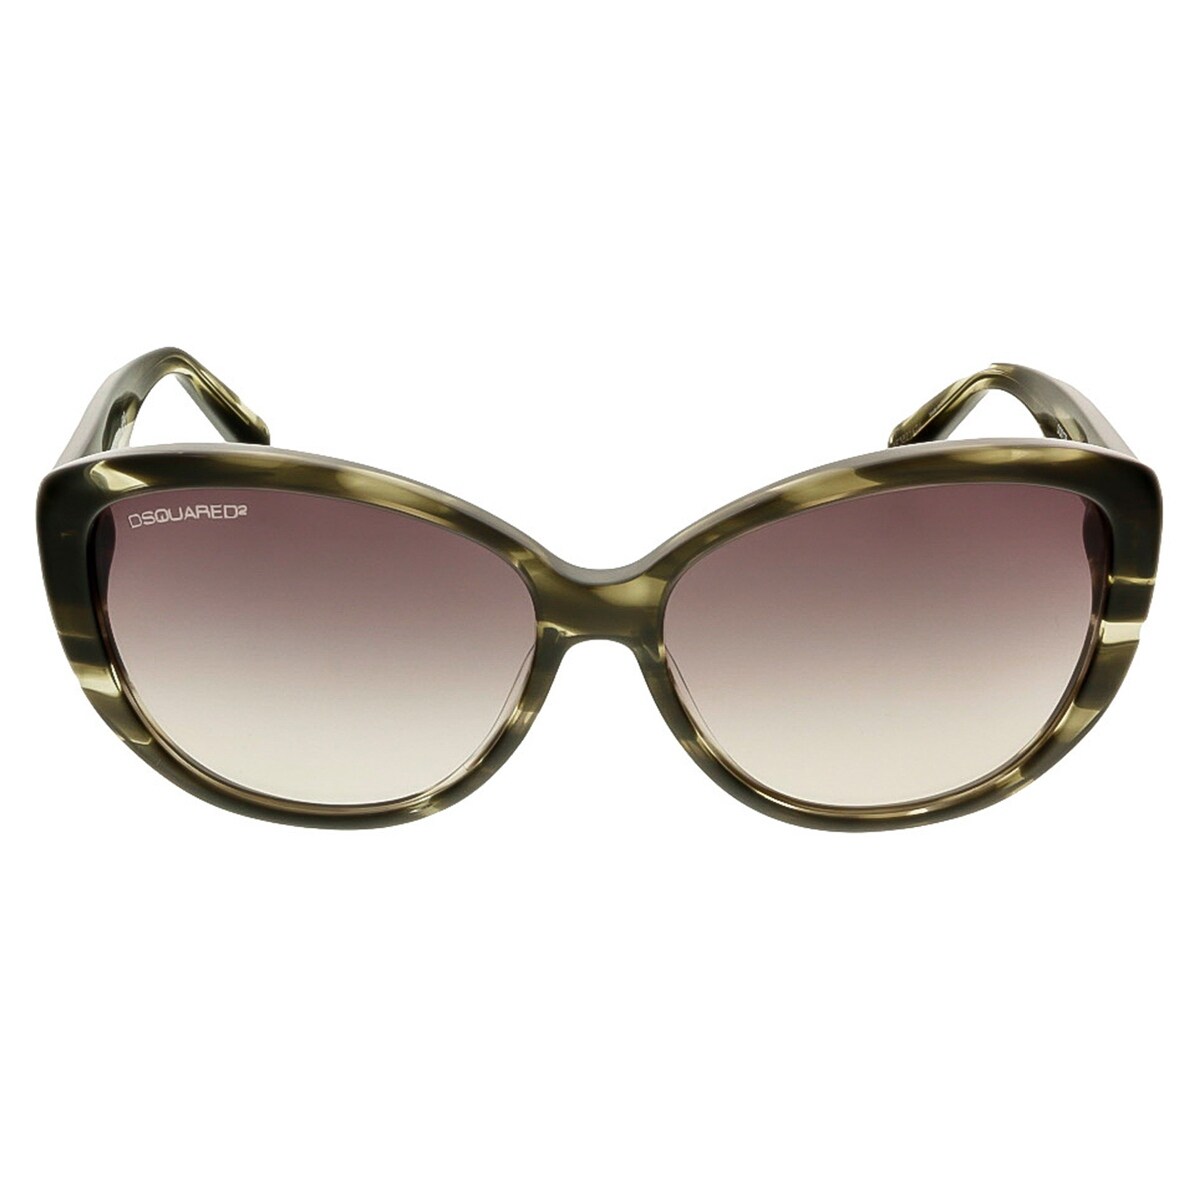 dsquared sunglasses made in china